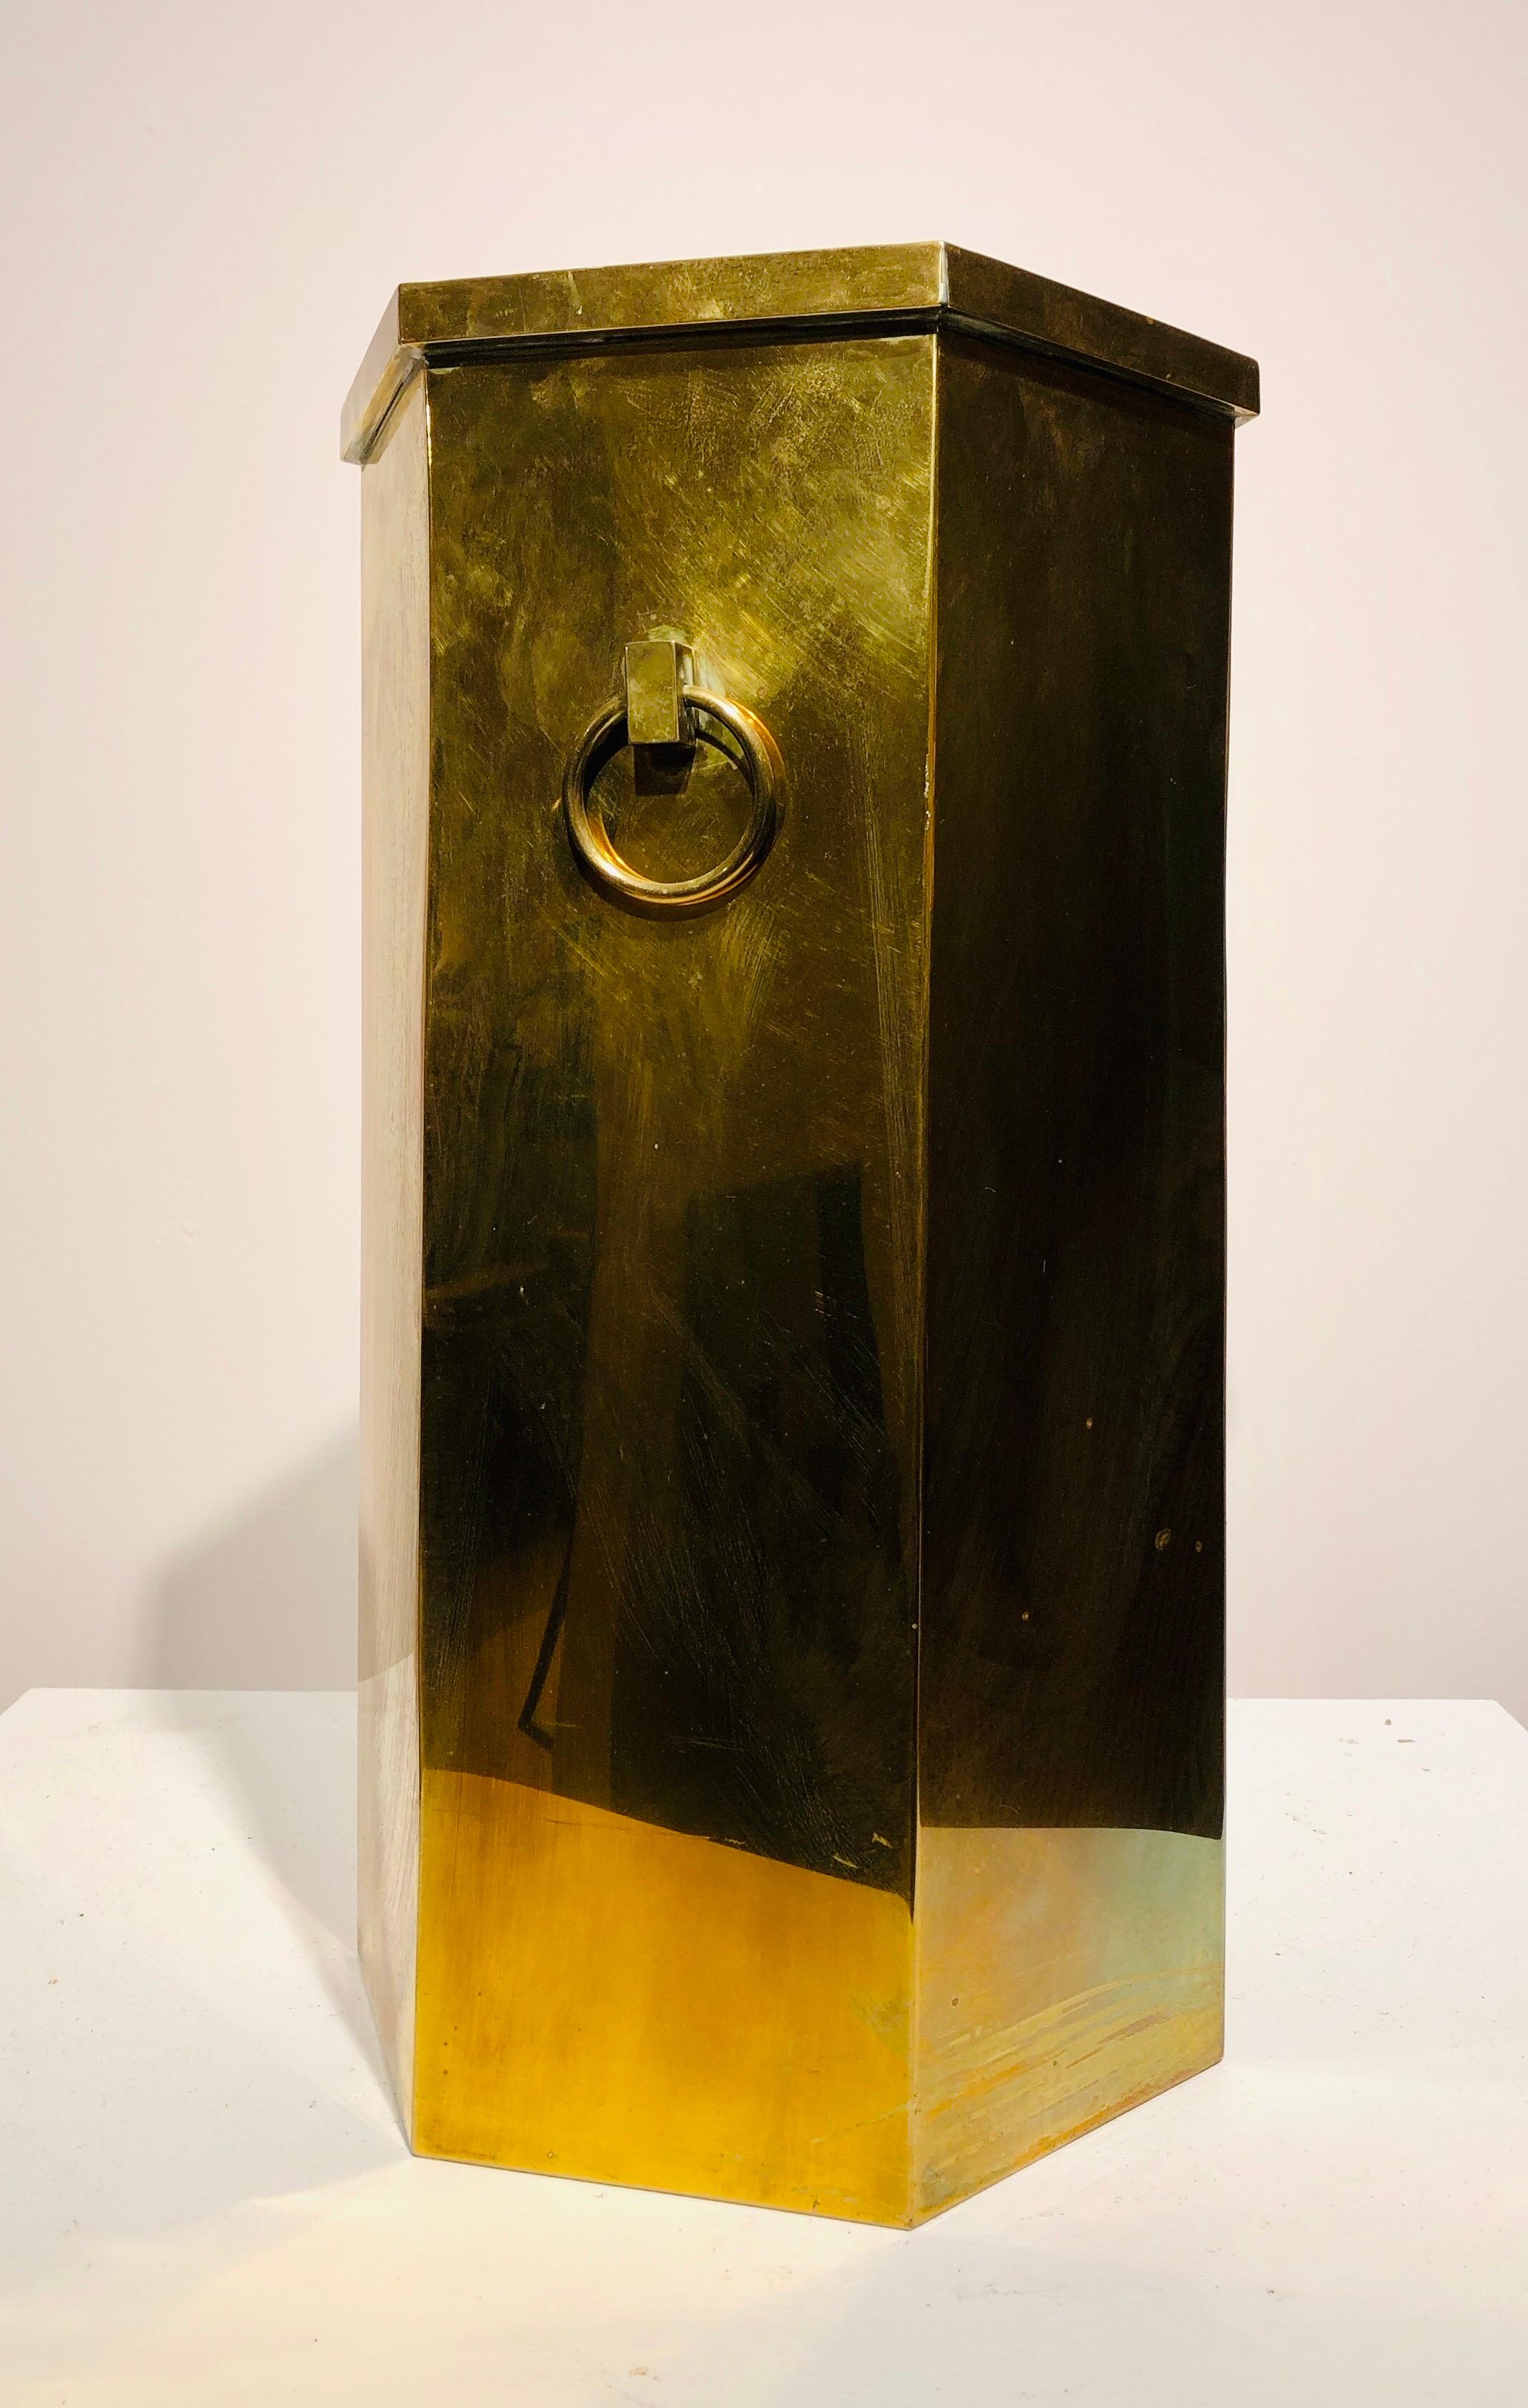 An hexagonal solid brass umbrella stand, adorned with two rings. Dating from the 1970s, in the style of the Baguès or Jansen houses.







